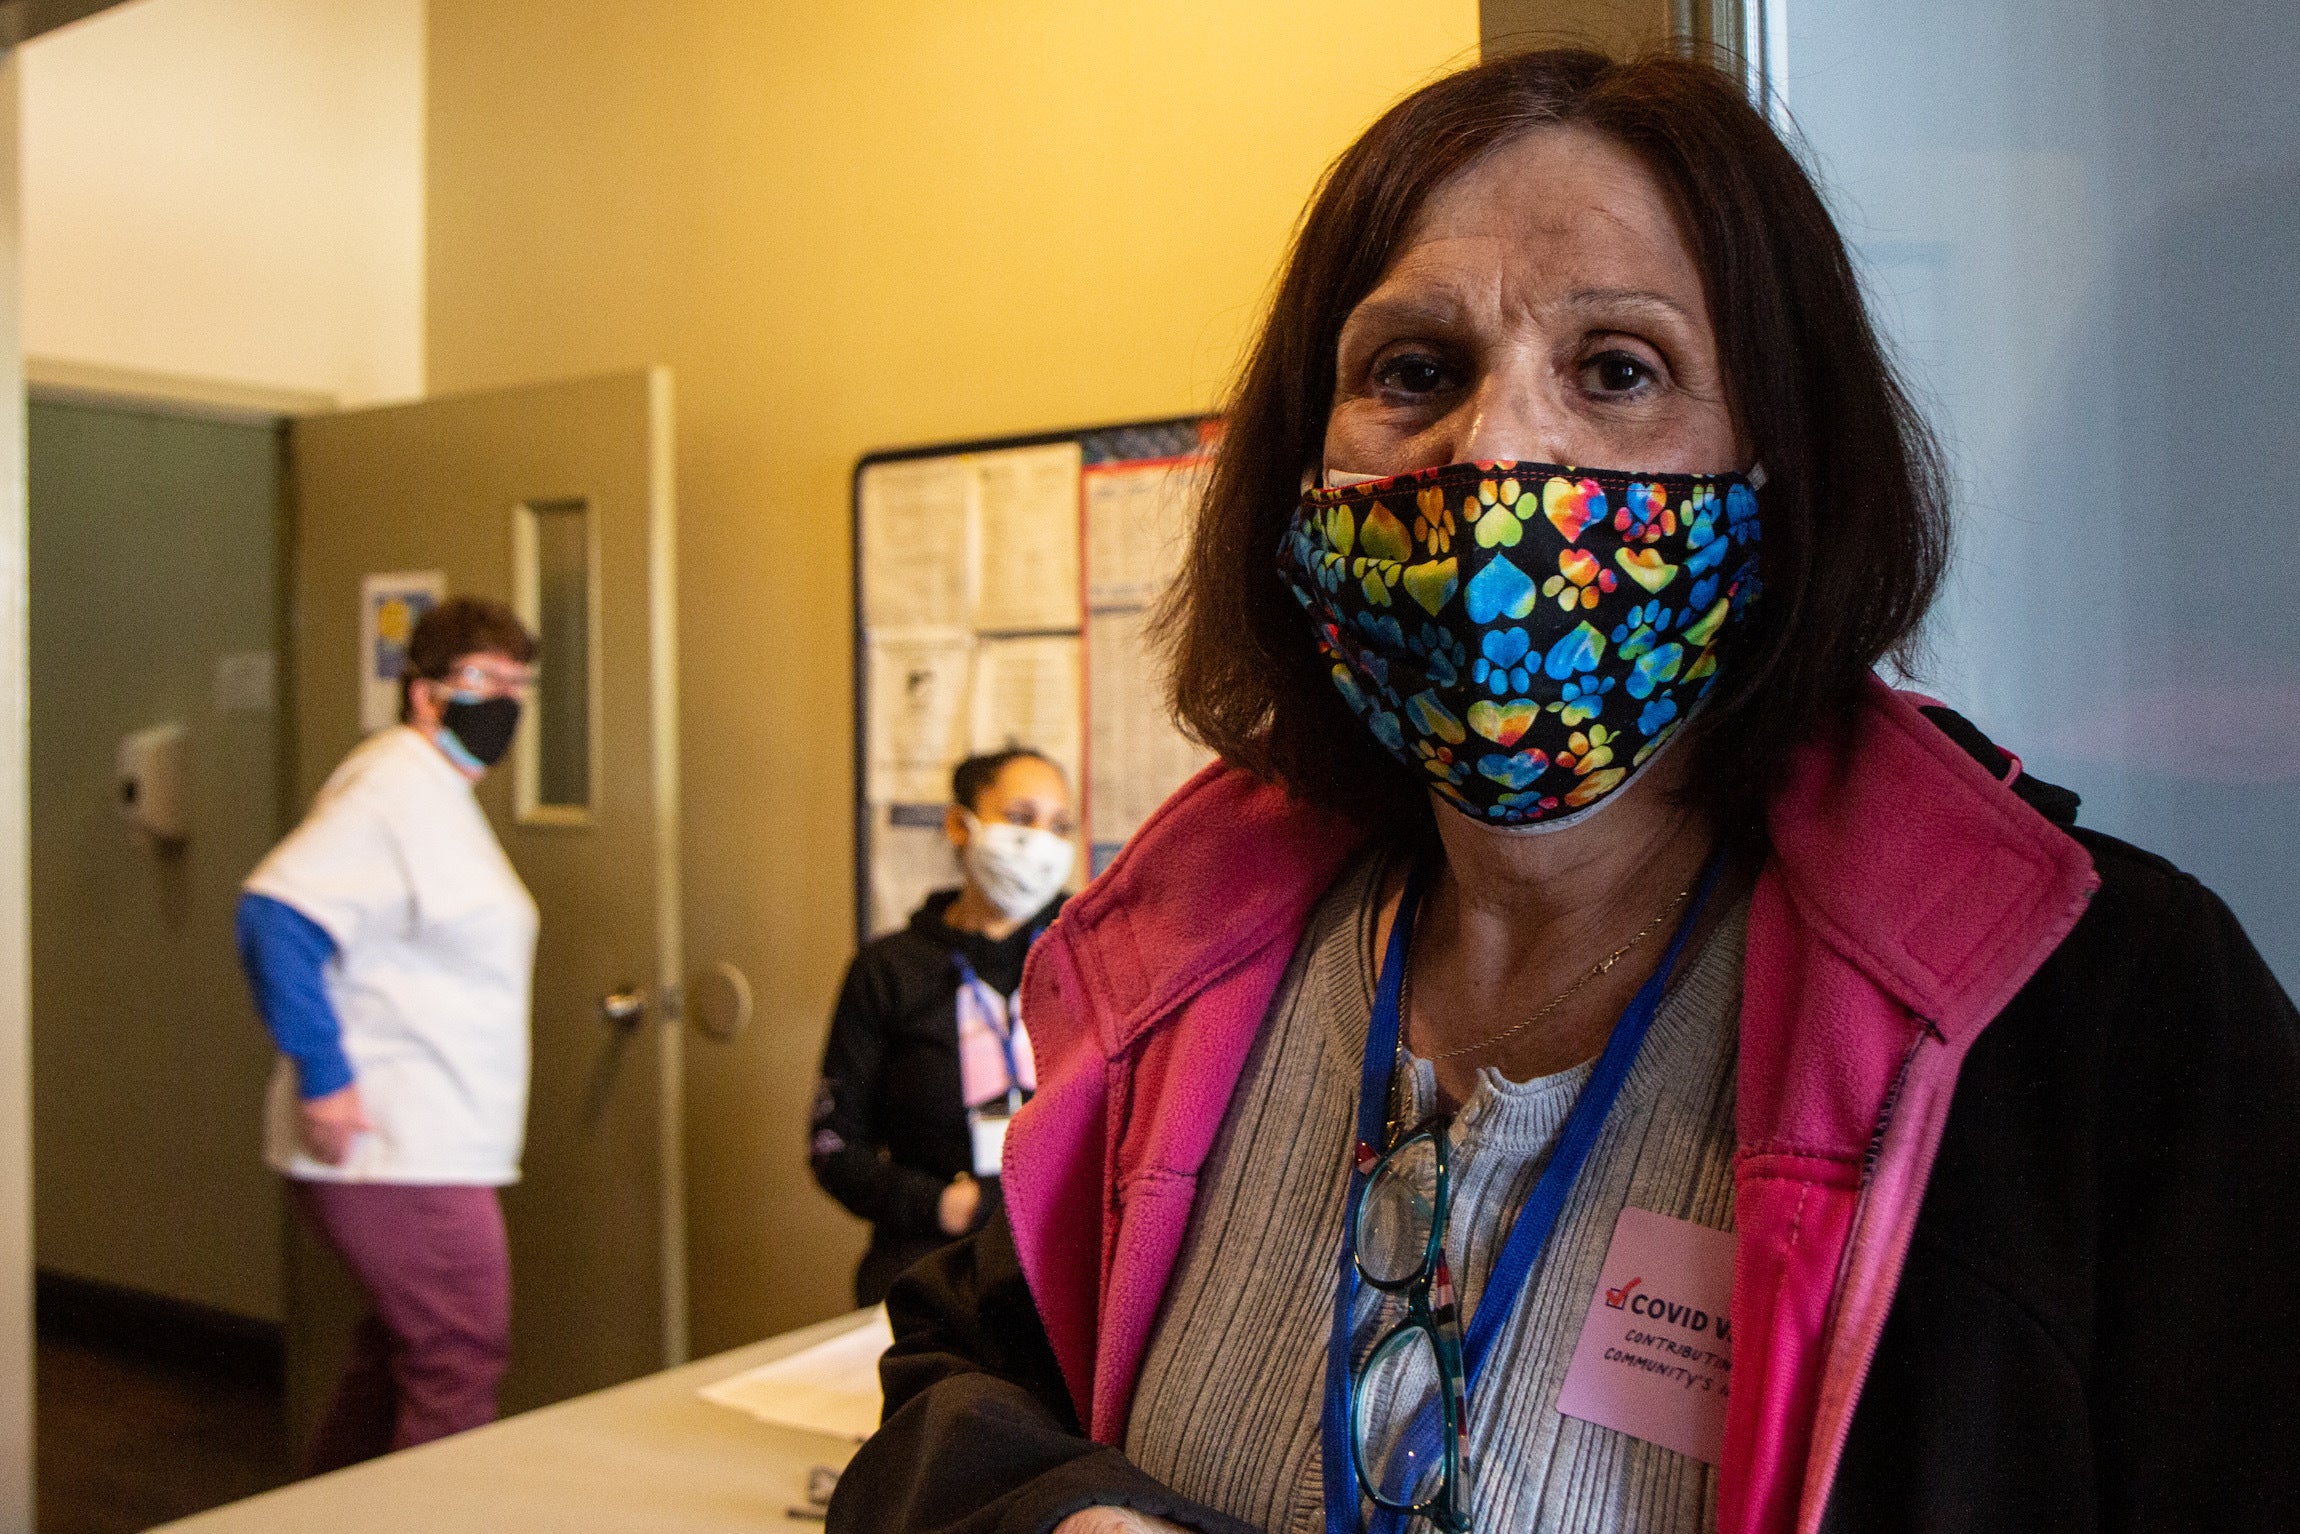 Annemarie Bravo used to be a resident at the Merakay’s Fresh Start recovery program and now is a fill-in staff member. She received the Johnson & Johnson COVID-19 vaccine at the recovery house on March 30, 2021. (Kimberly Paynter/WHYY)